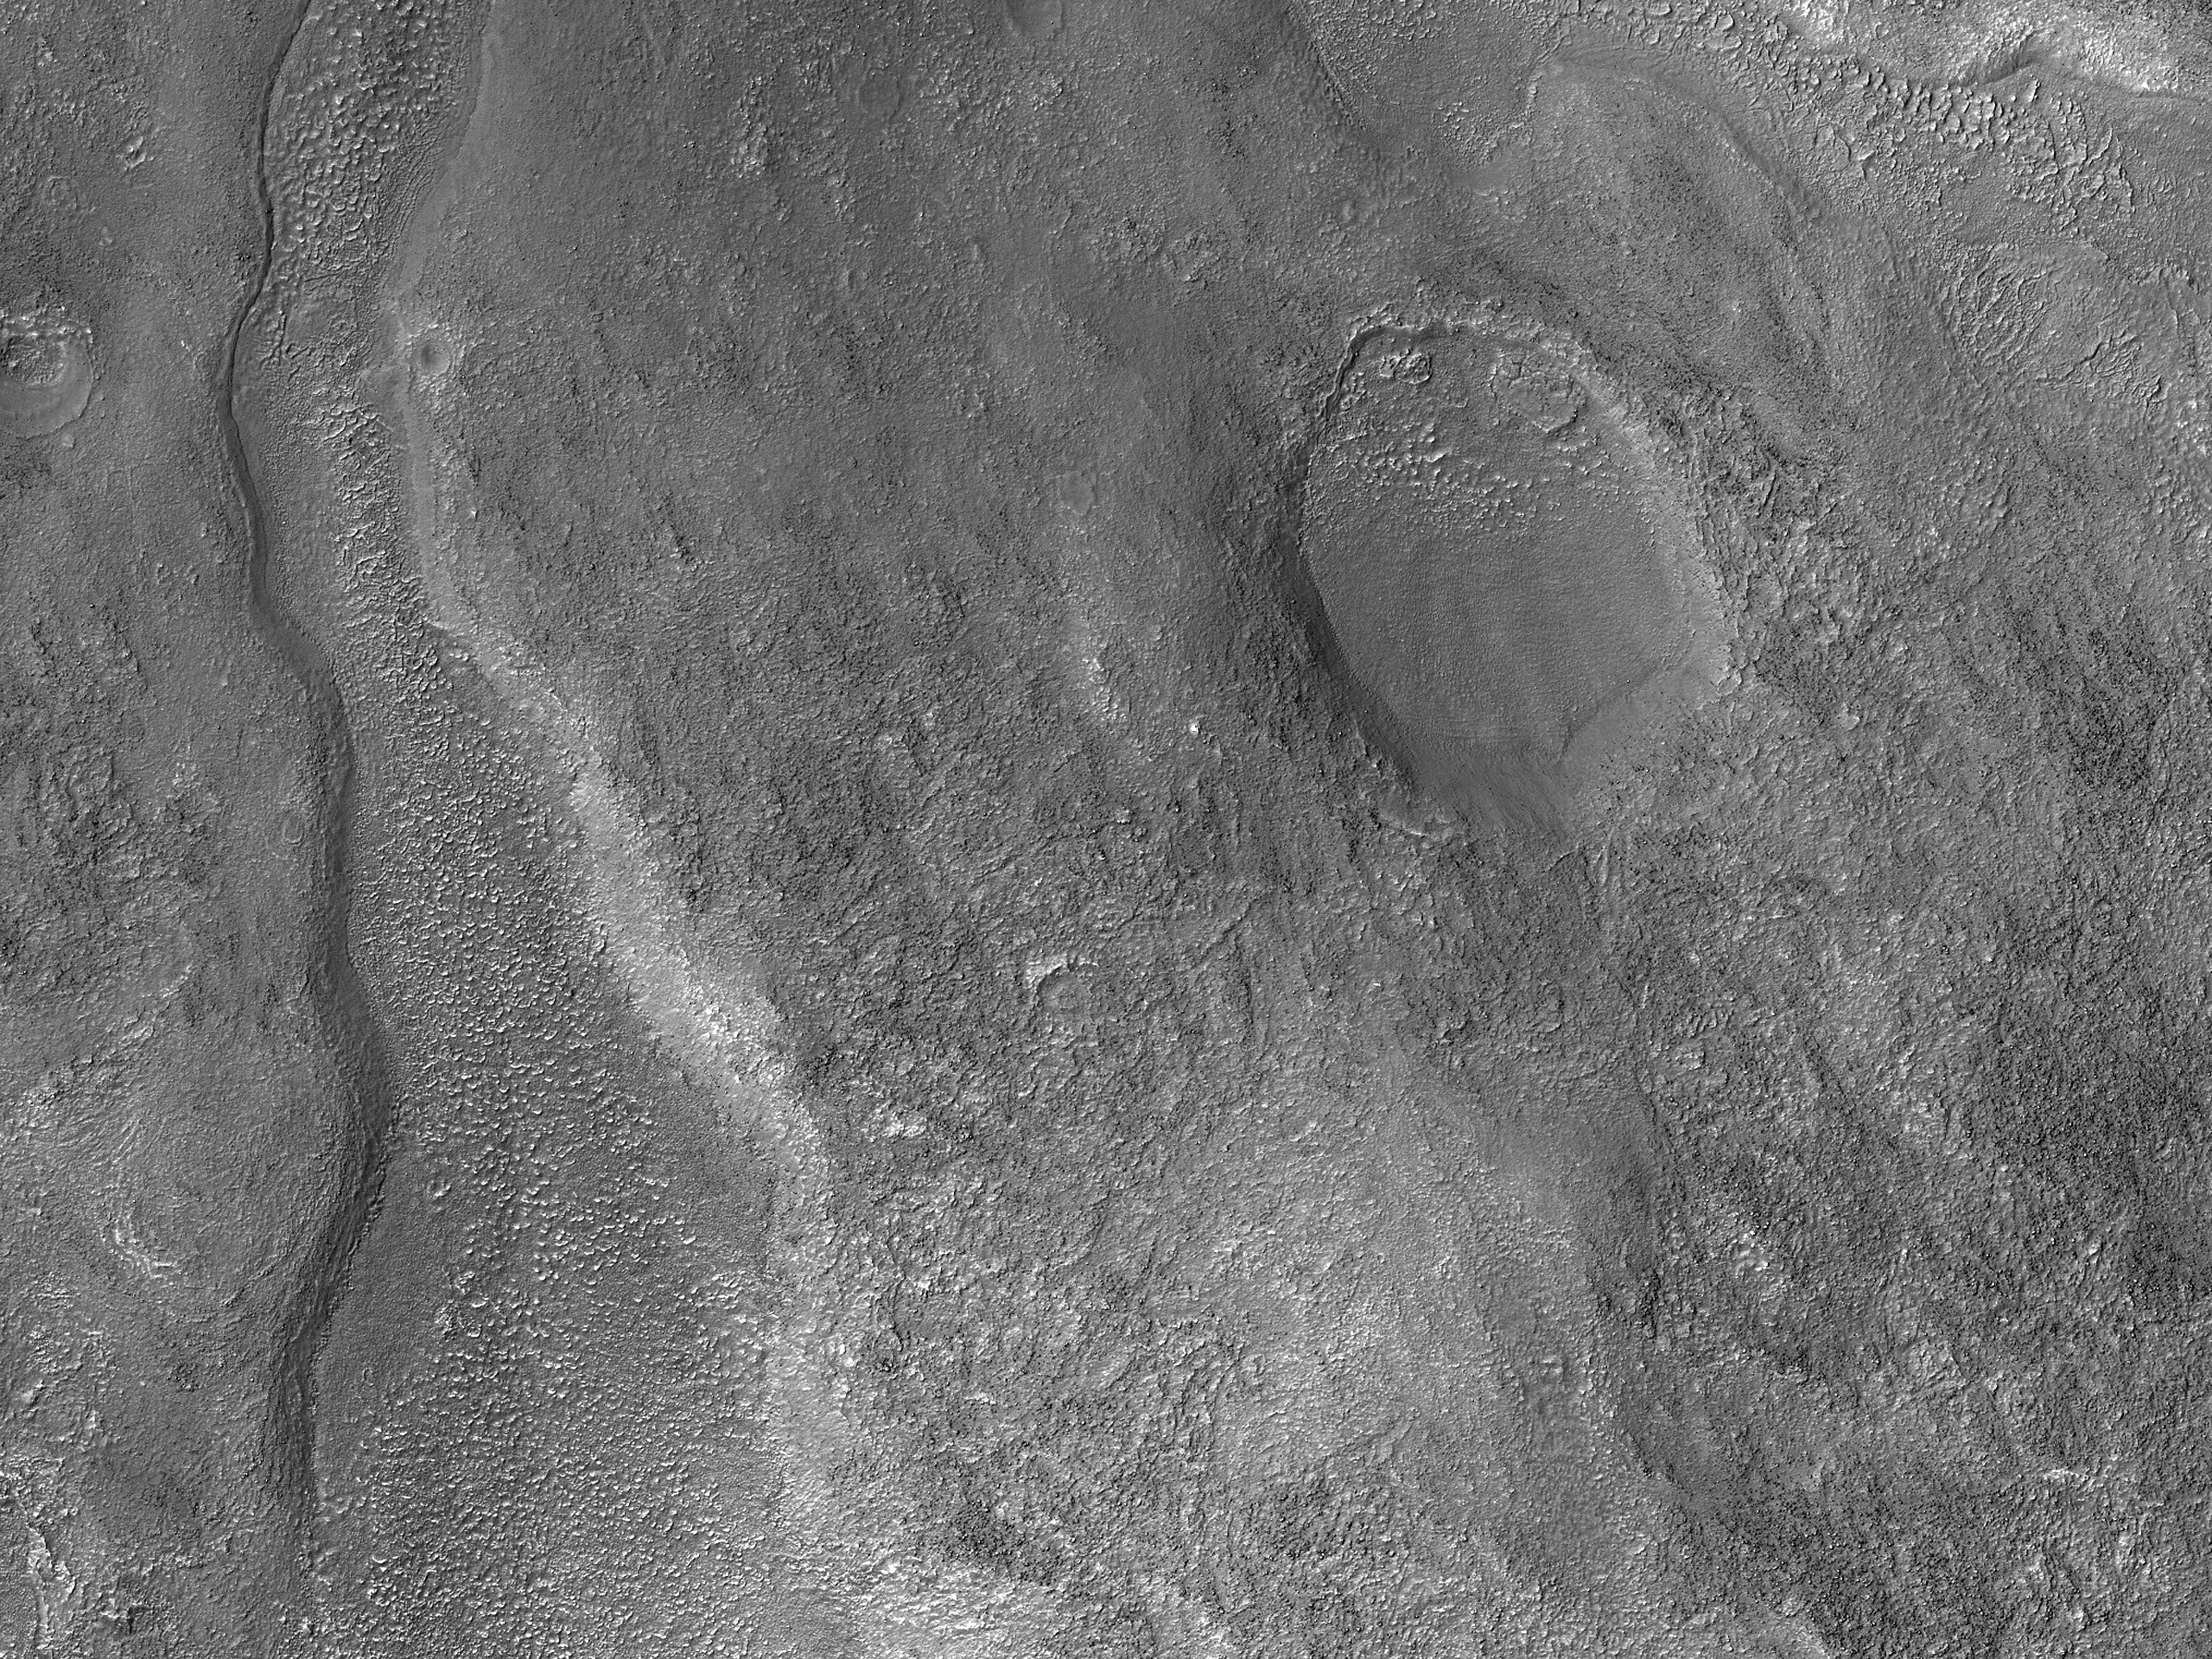 Eroded Crater near Lowell Crater